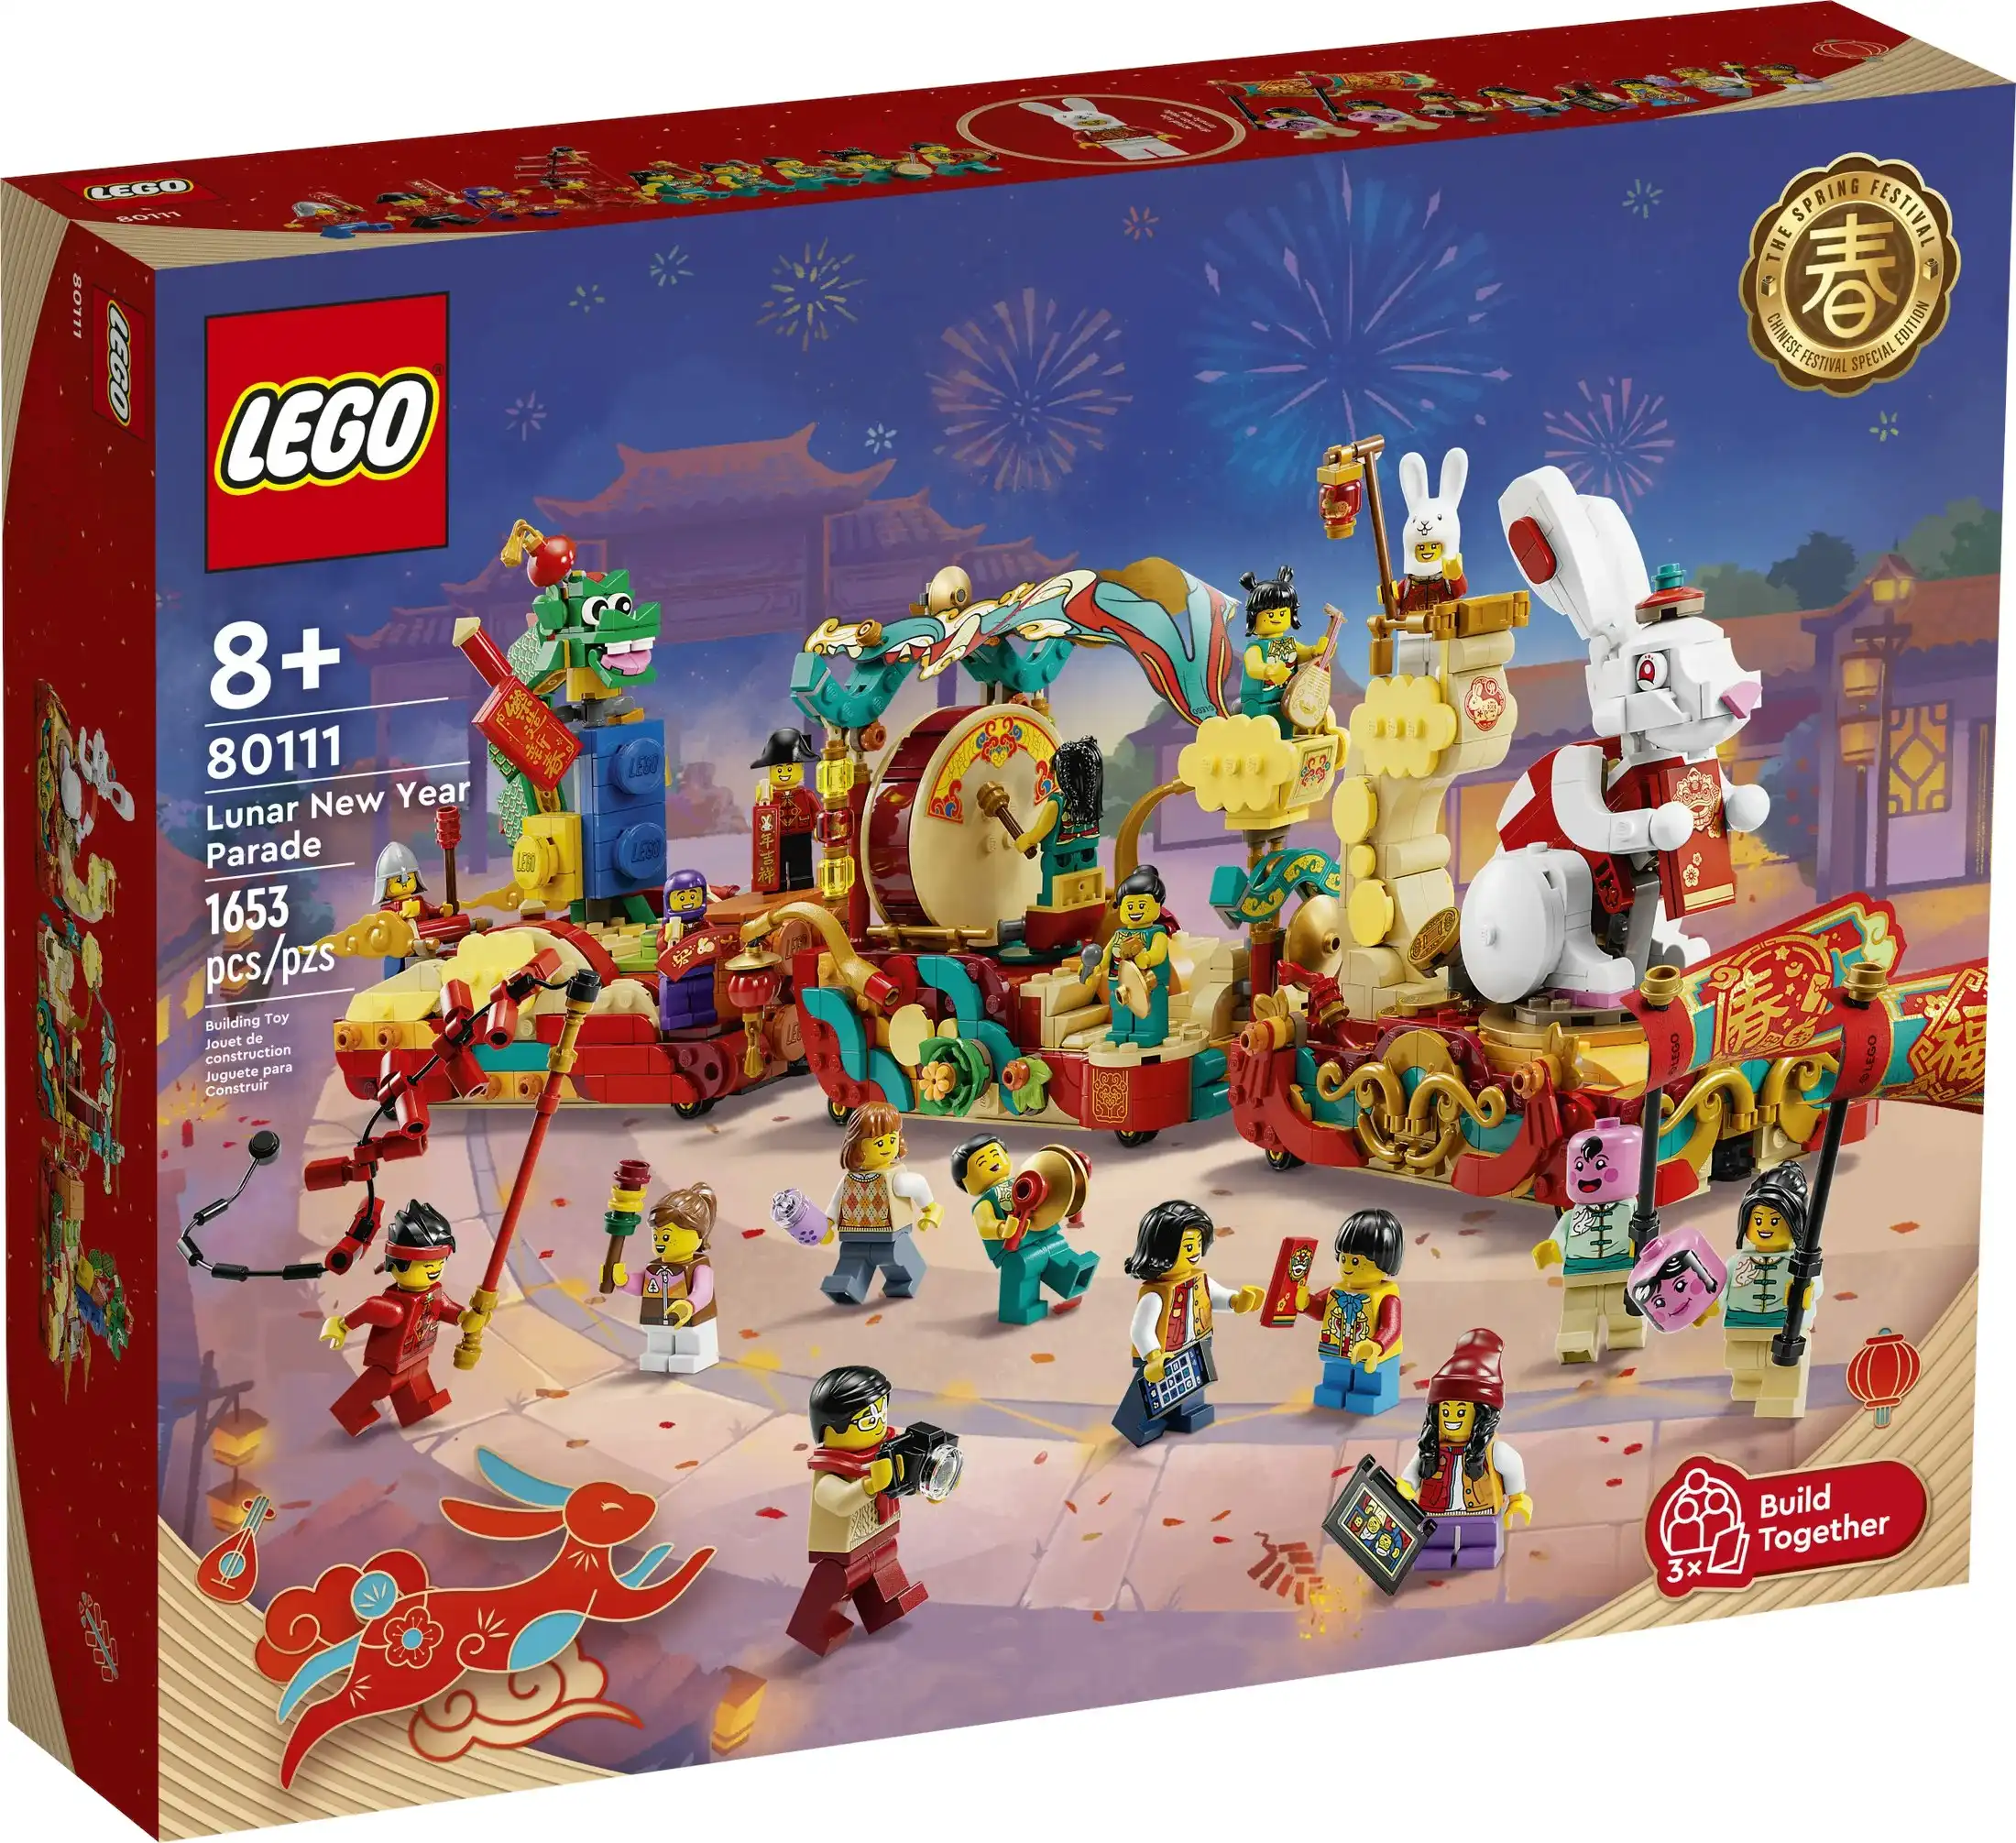 LEGO 80111 Lunar New Year Parade - Chinese Festivals